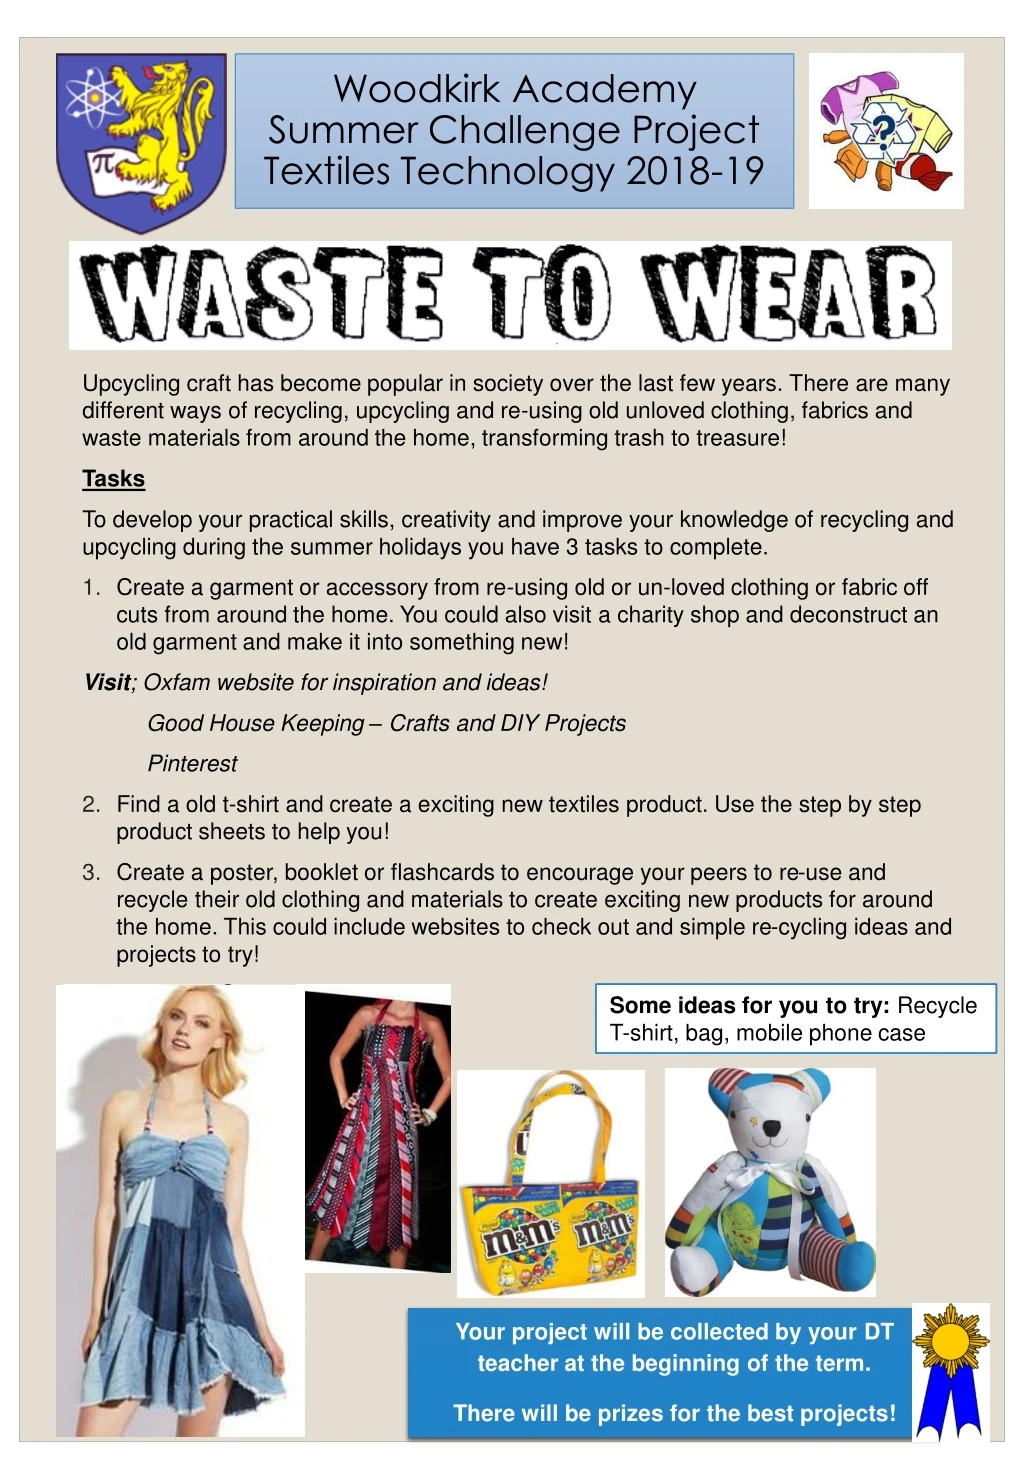 woodkirk academy summer challenge project textiles technology 2018 19